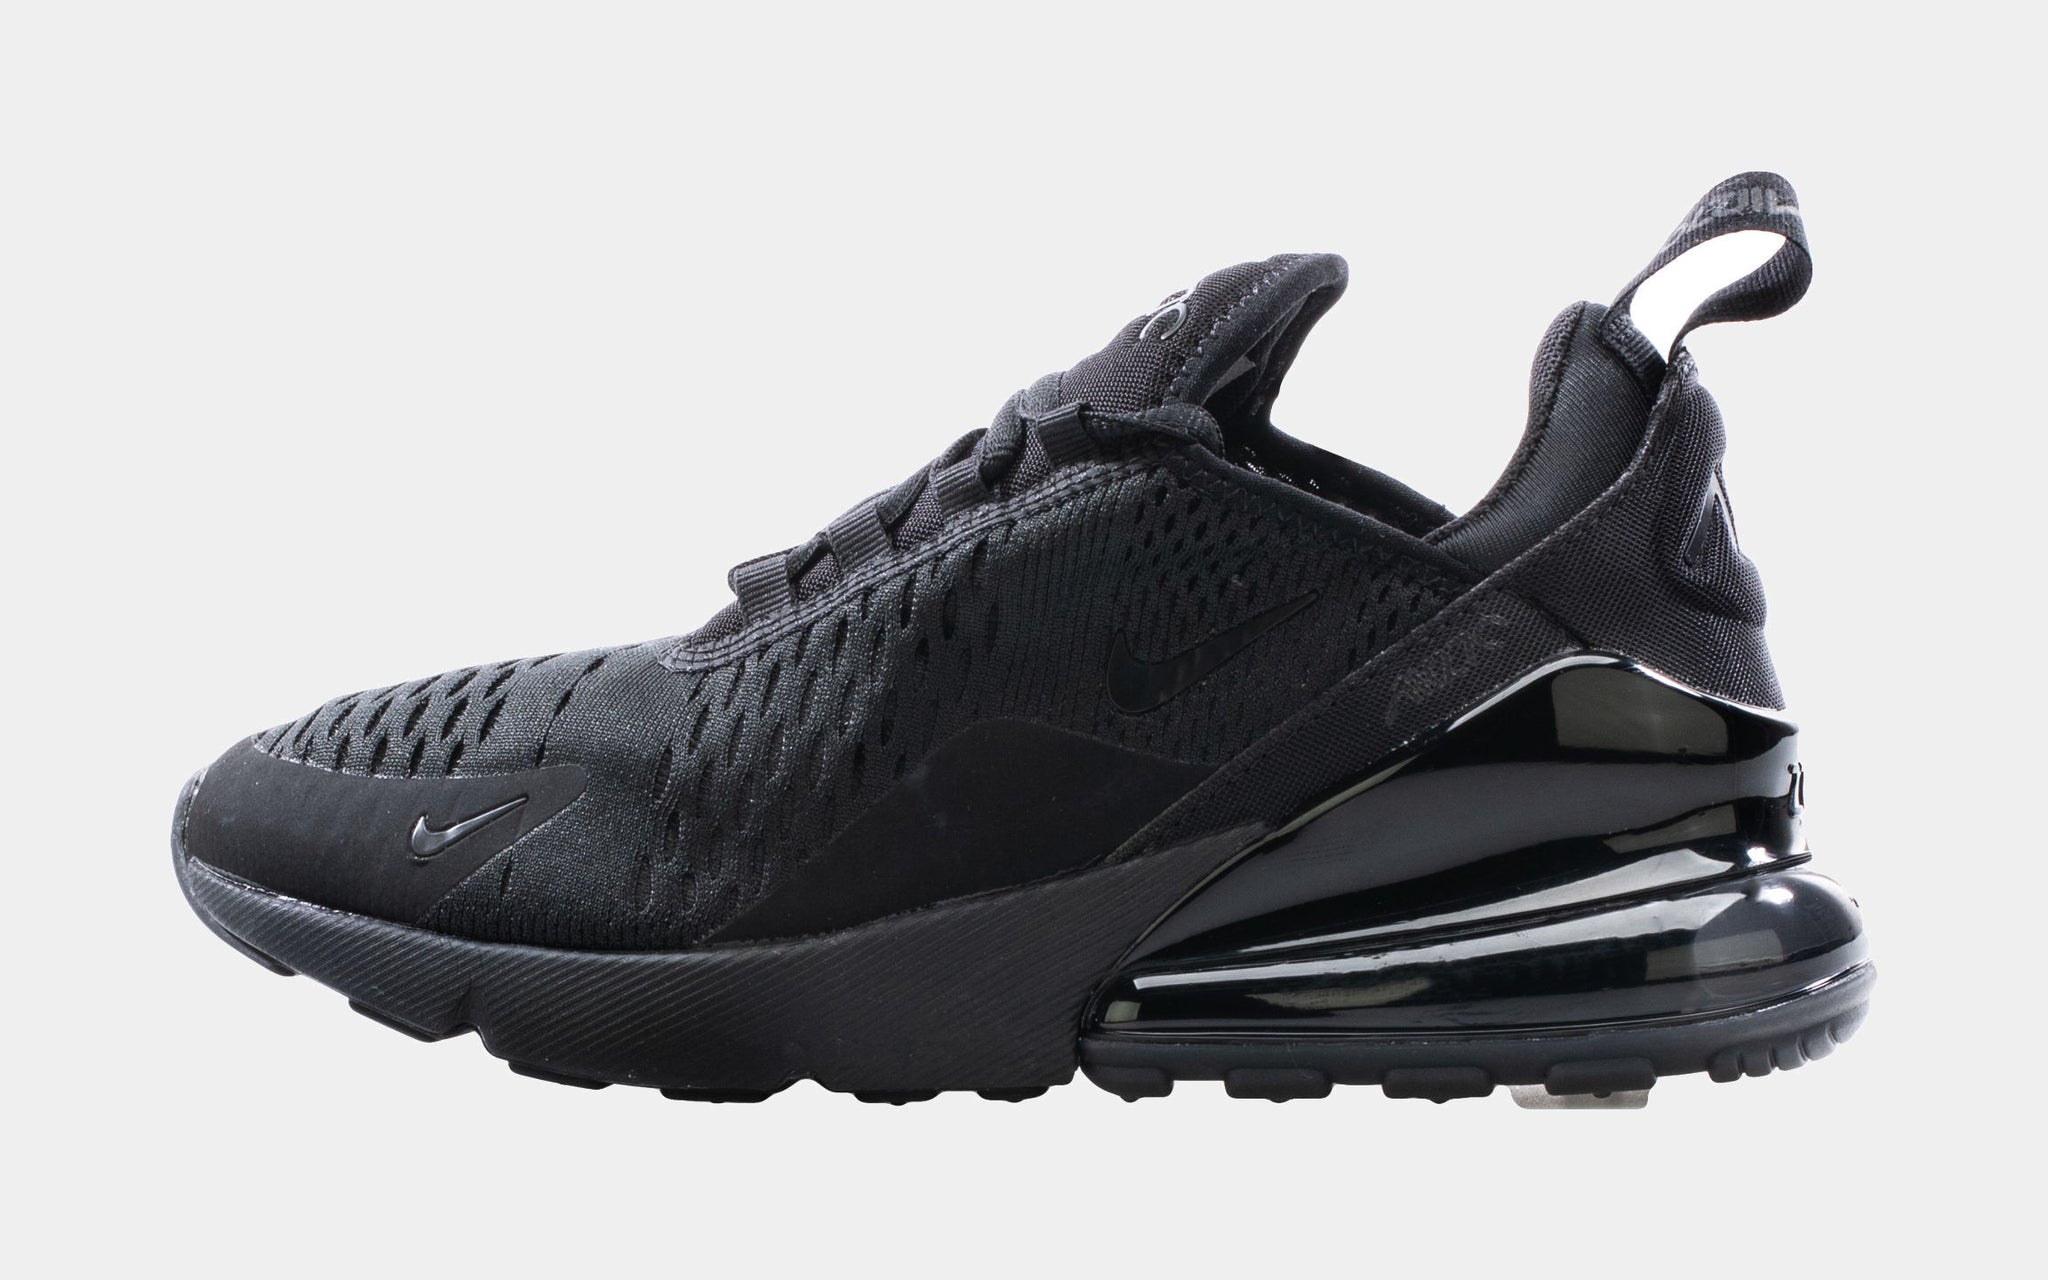 NIKE AIR MAX 270 SNEAKERS BLACK/ ANTHRACITE/ WHITE WOMEN'S SIZE 6.5